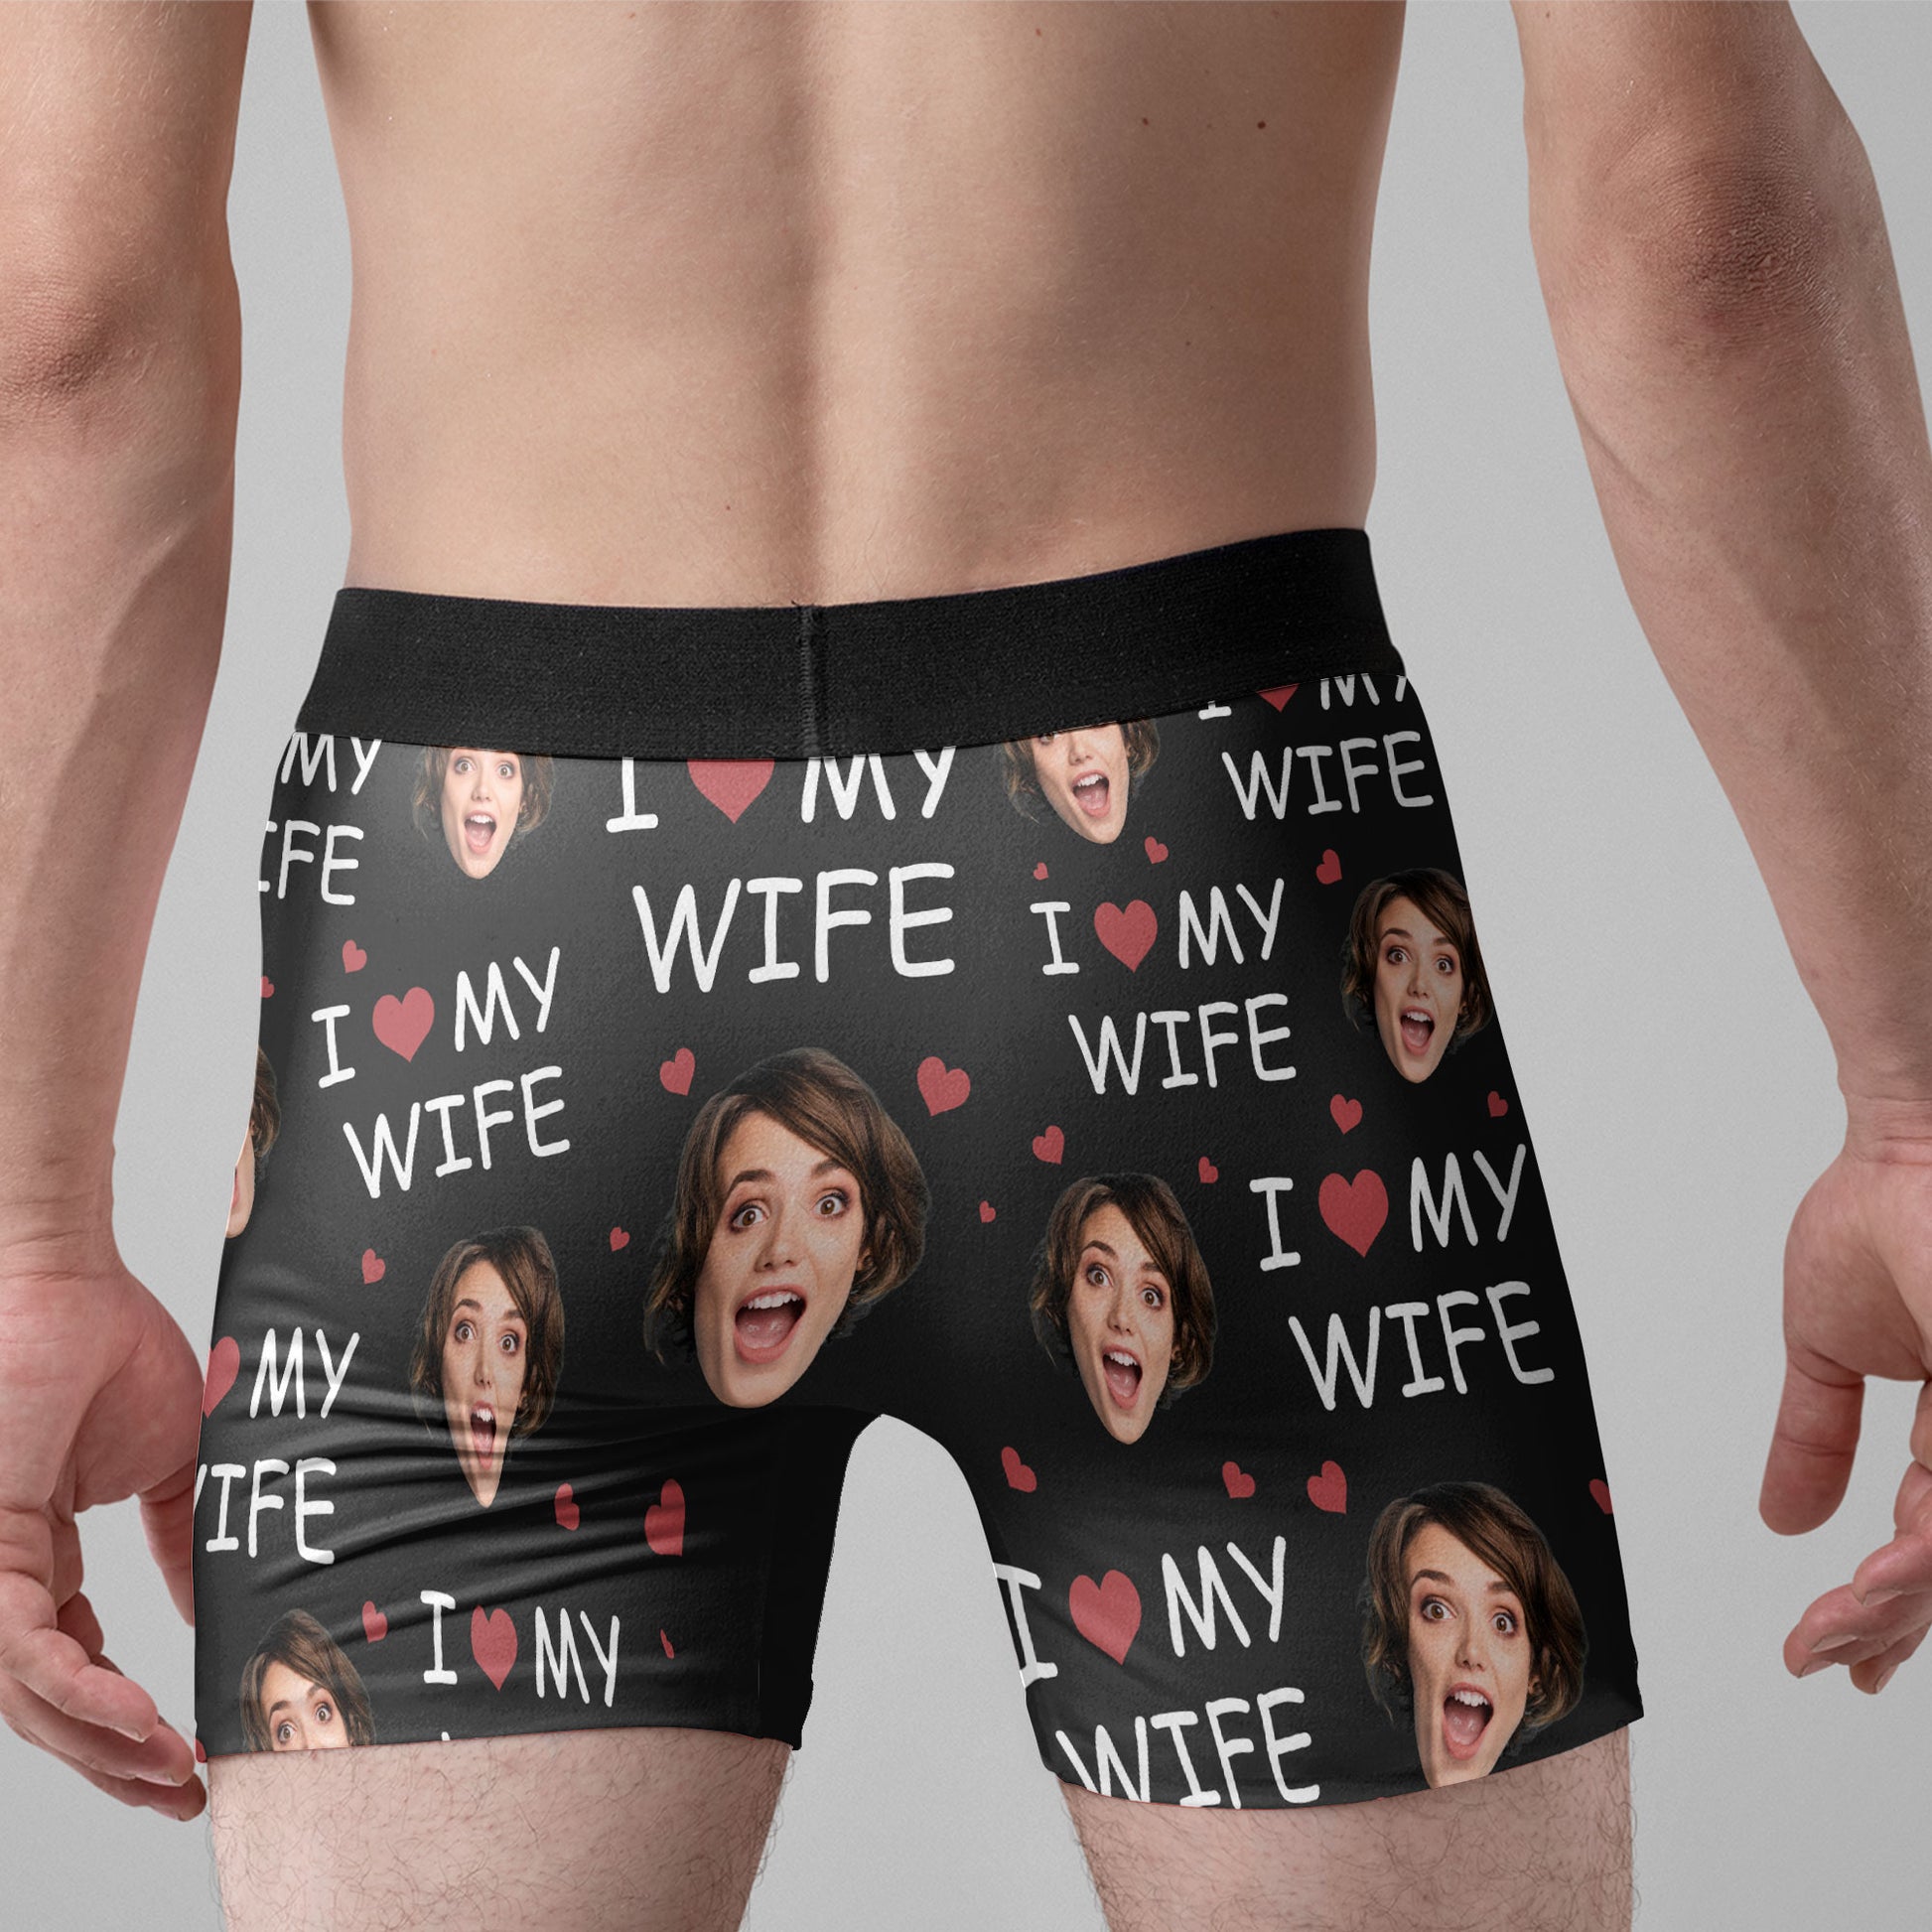 (Photo Inserted) I Love My Wife - Personalized Men's Boxer Briefs - Valentine's Day, Loving, Birthday Gift For Boyfriend, Husband, Life Partners